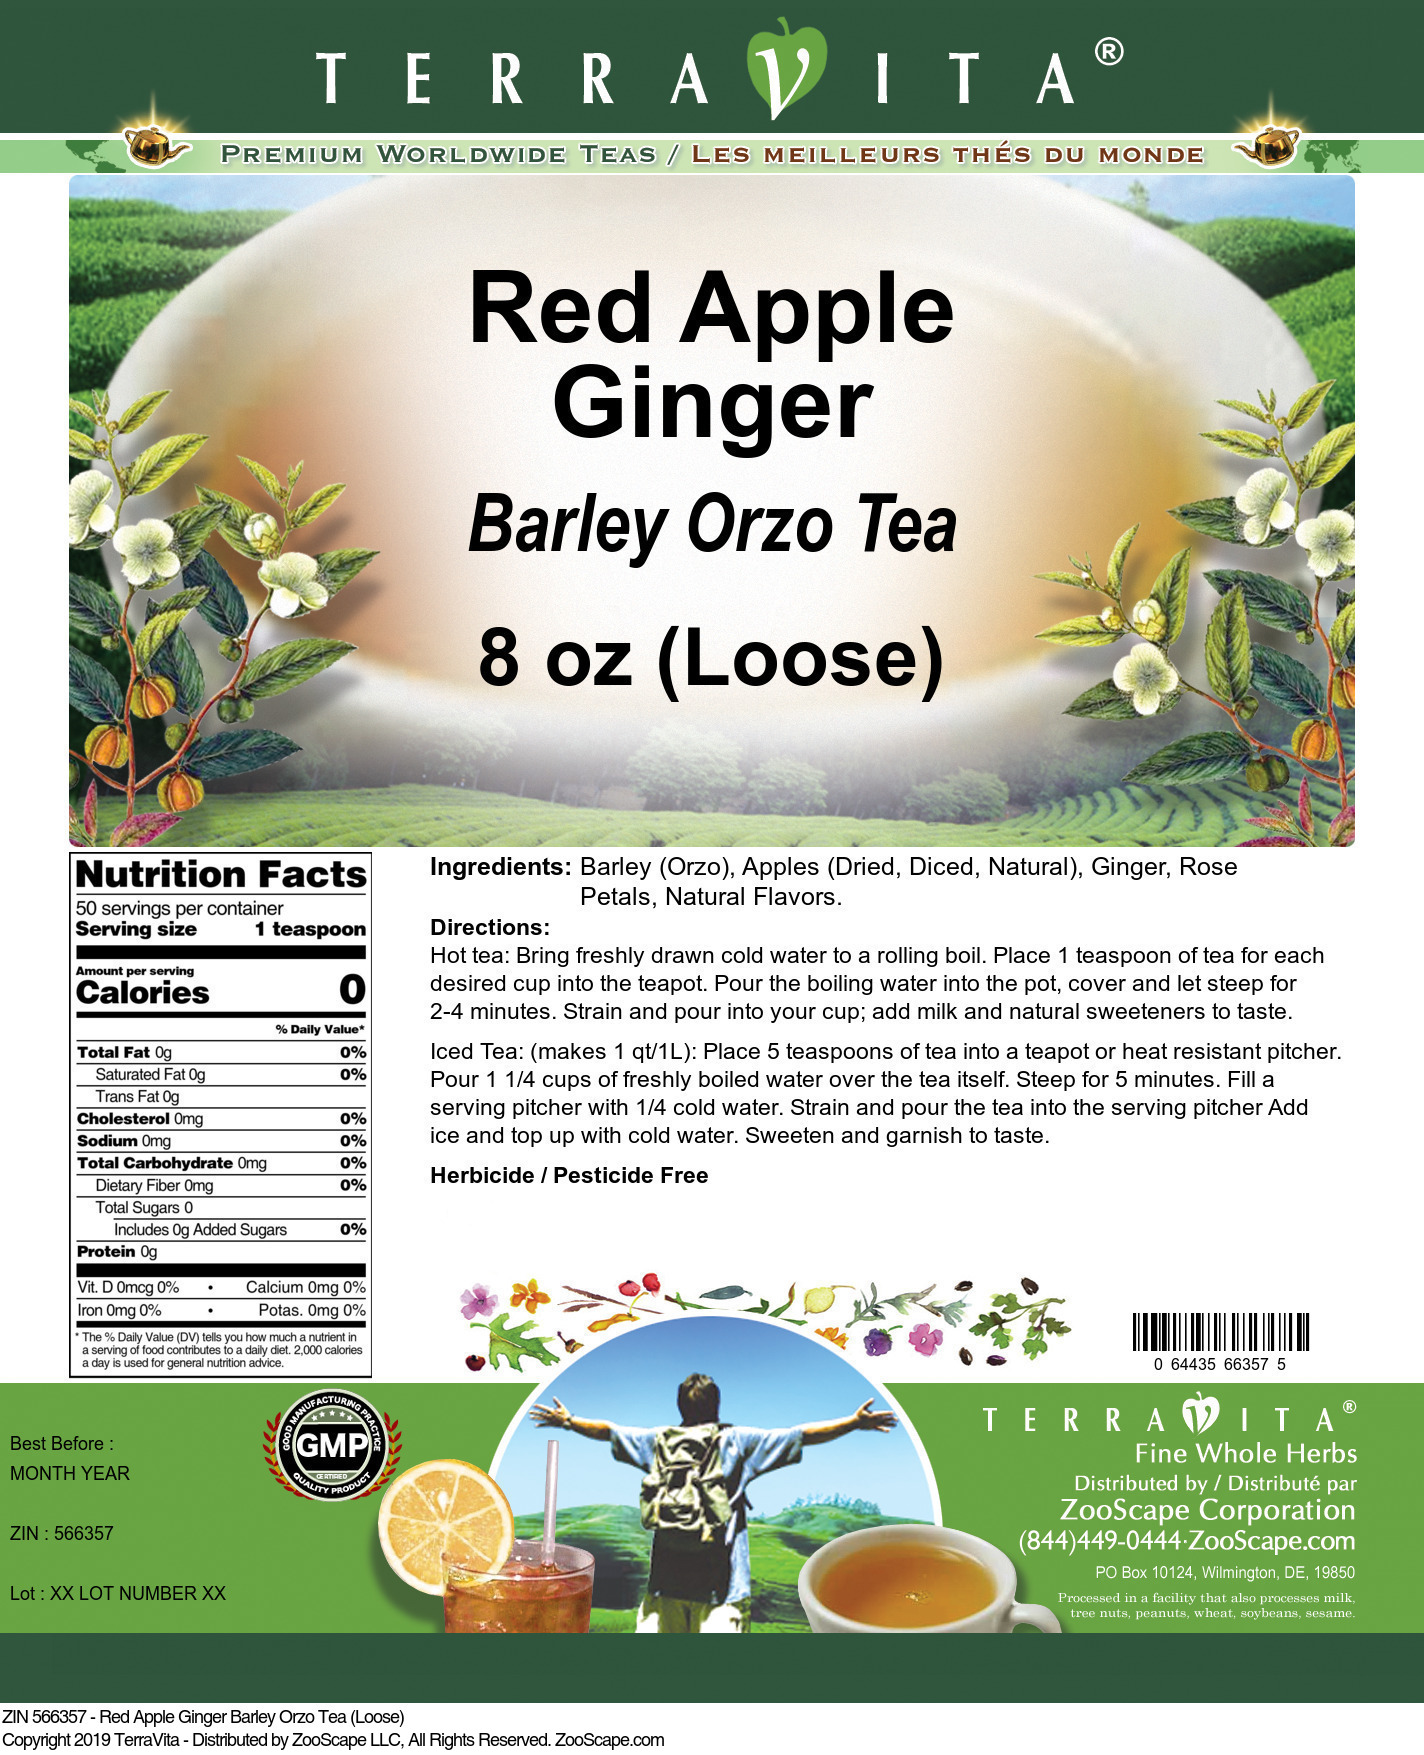 Red Apple Ginger Barley Orzo Tea (Loose) - Label